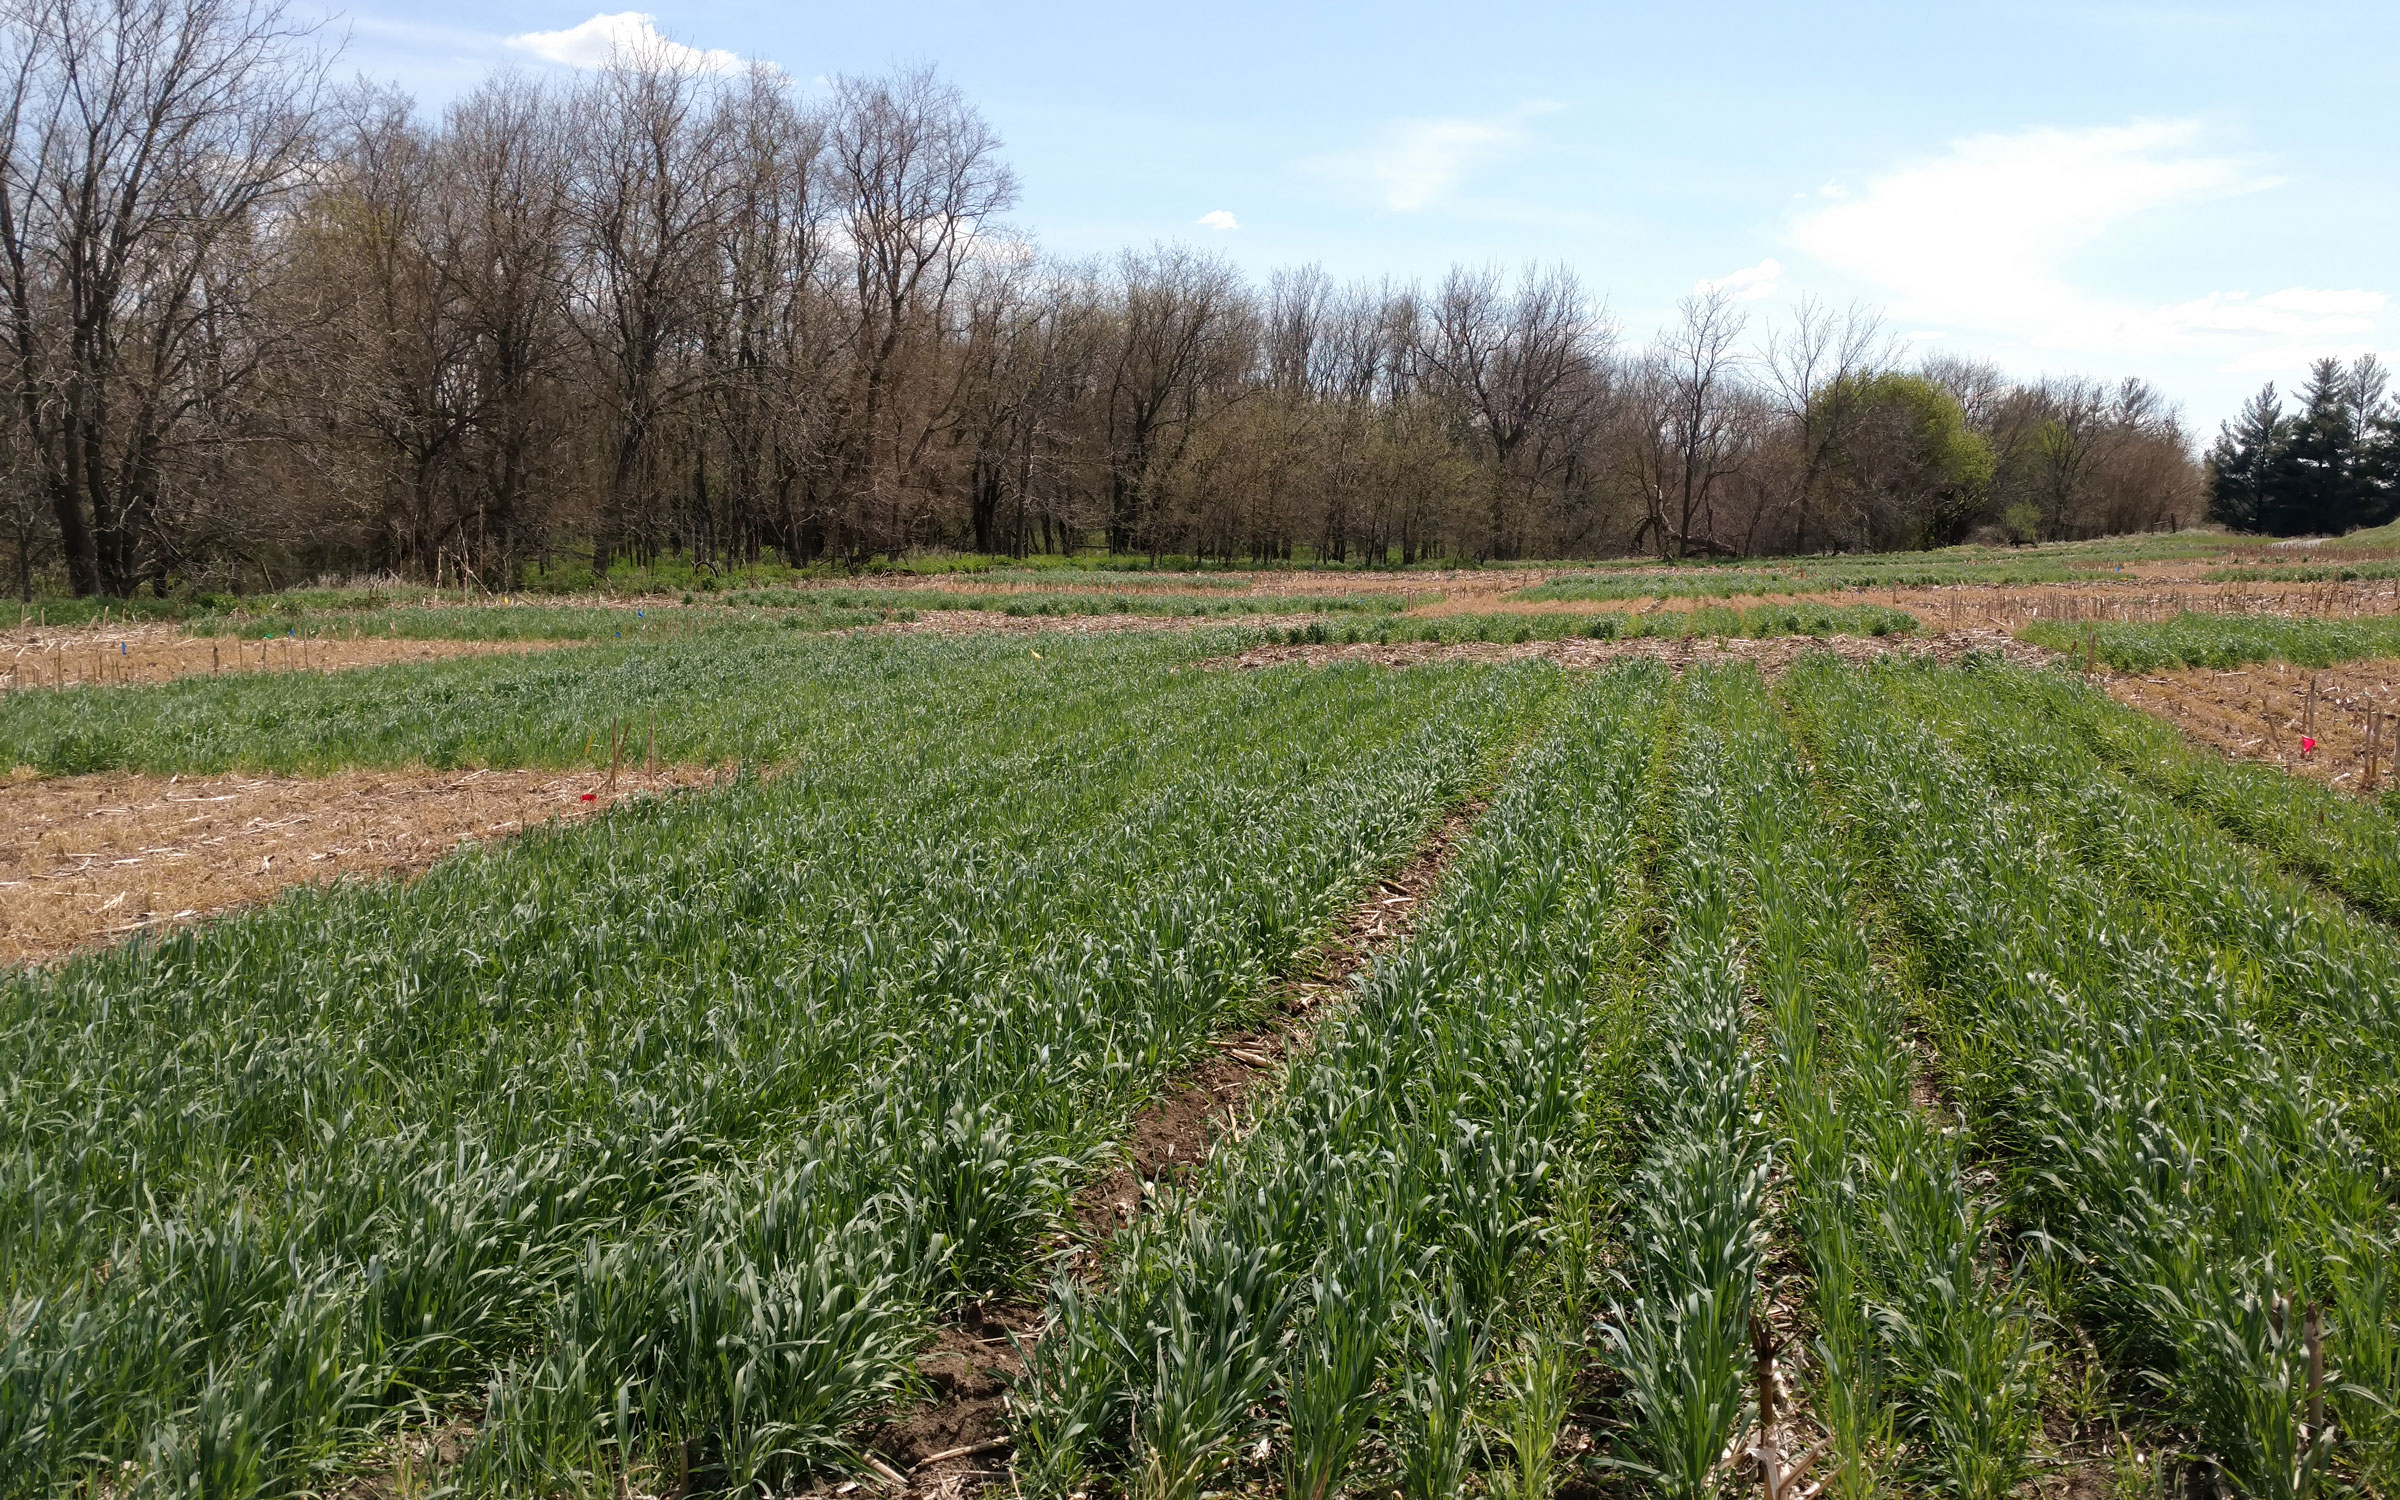 Rye cover crop at late termination (early May) with and without corn residue removal at Rogers Memorial Farm near Lincoln, Nebraska. Photo courtesy of Humberto Blanco. 